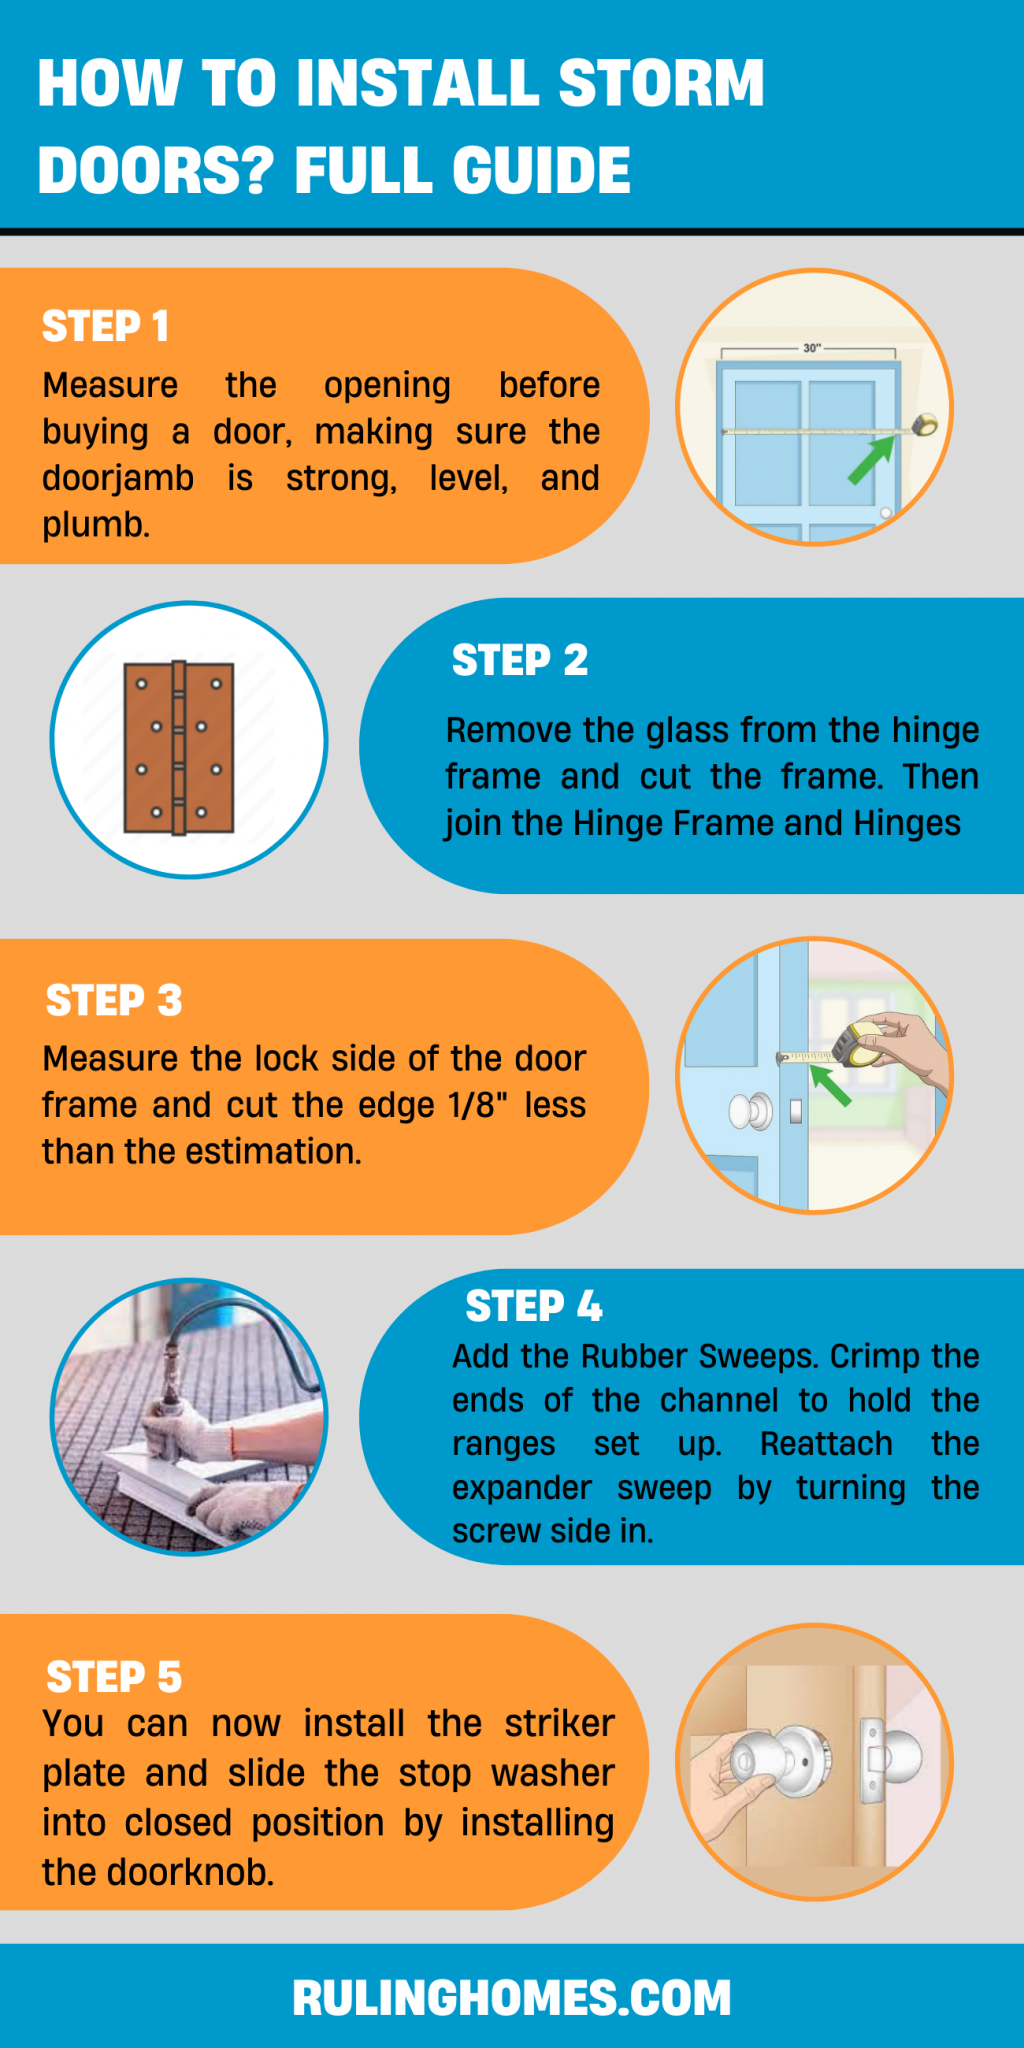 How To Install Storm Doors Infographic 1024x2048 